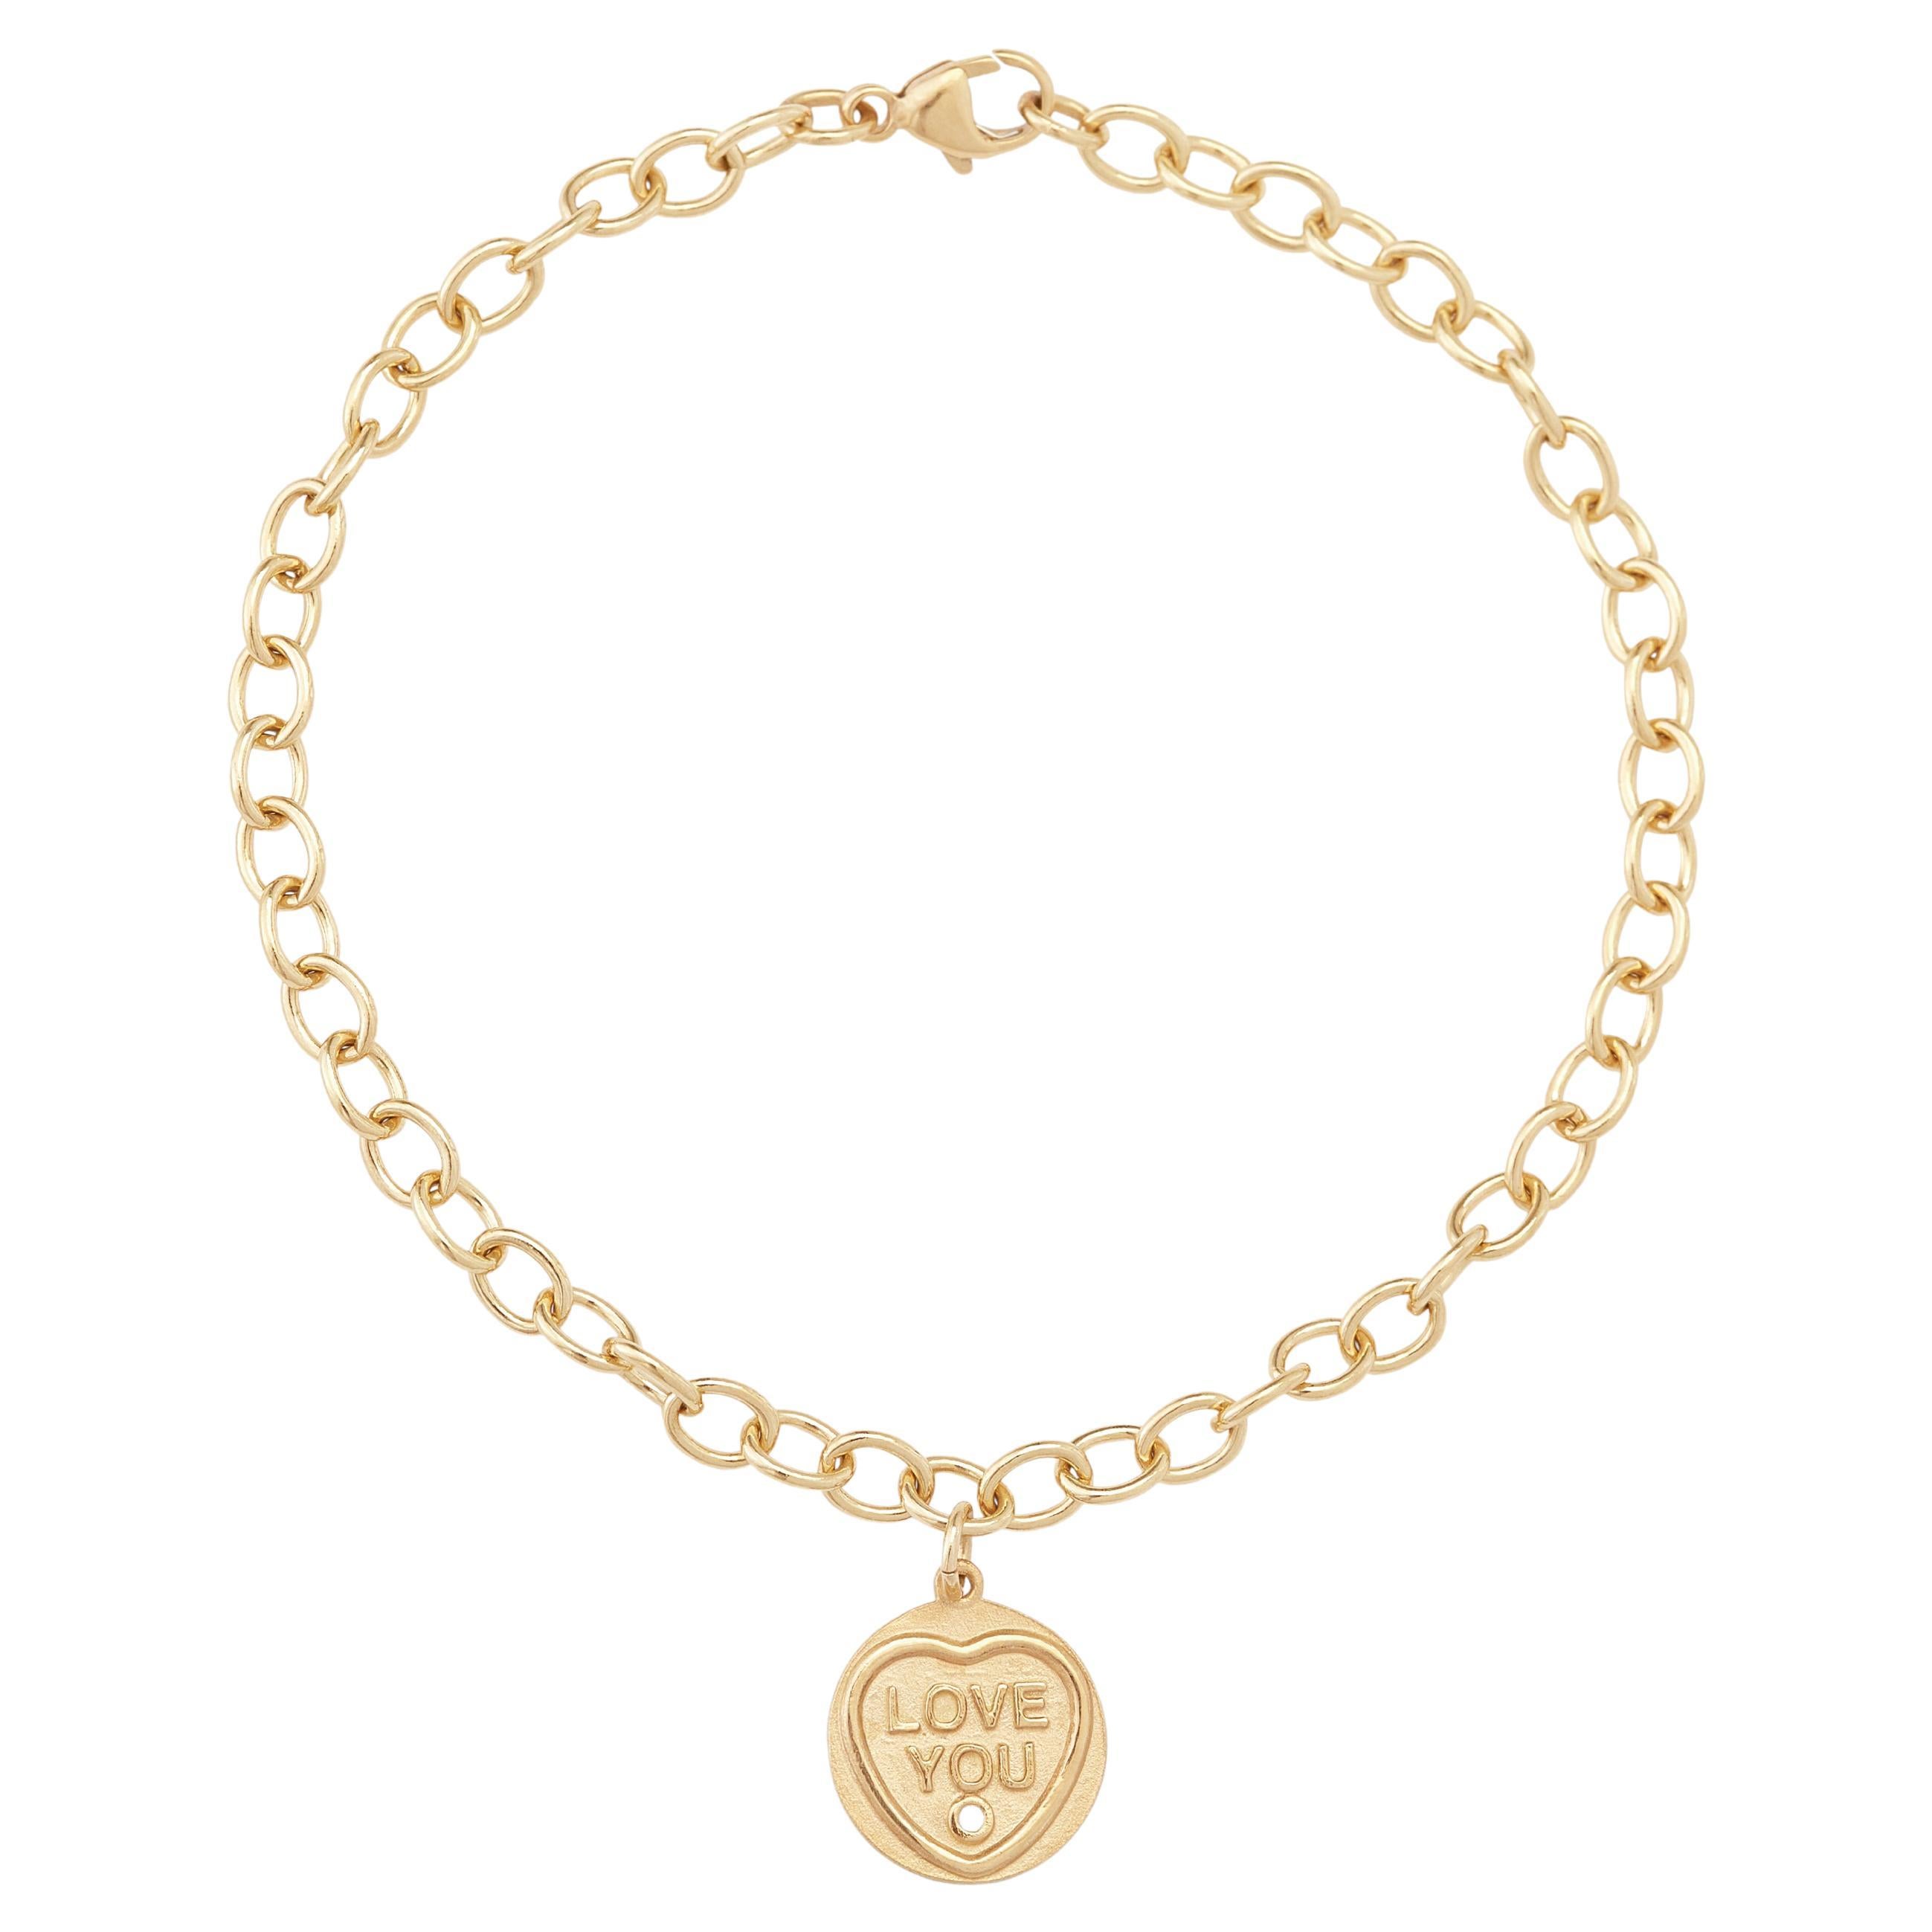 Love Hearts Love You Charm Bracelet in 18 Carat Gold and Diamond For Sale